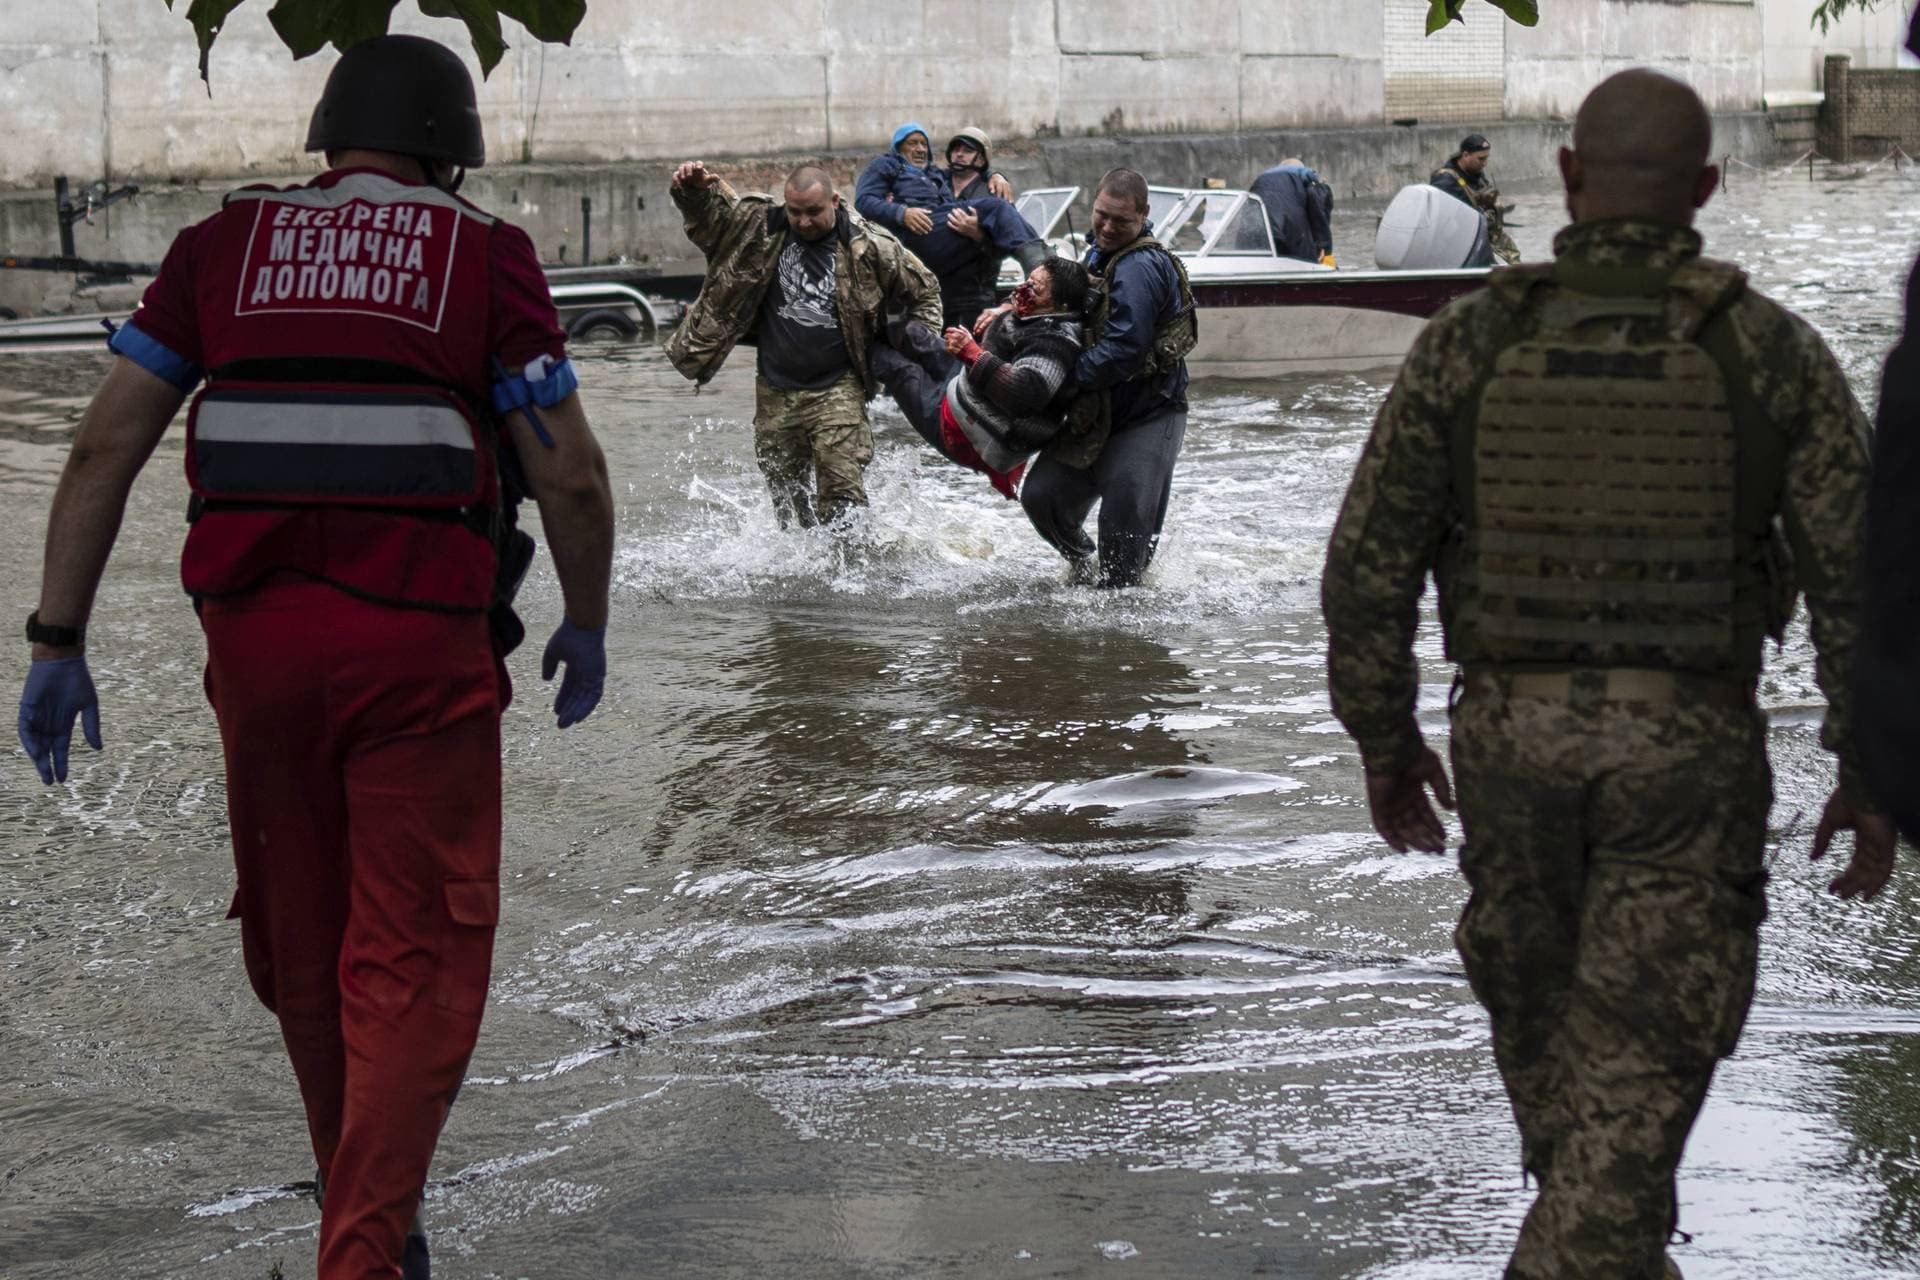 Emergency teams help rush to safety injured civilian evacuees on the western bank in Kherson